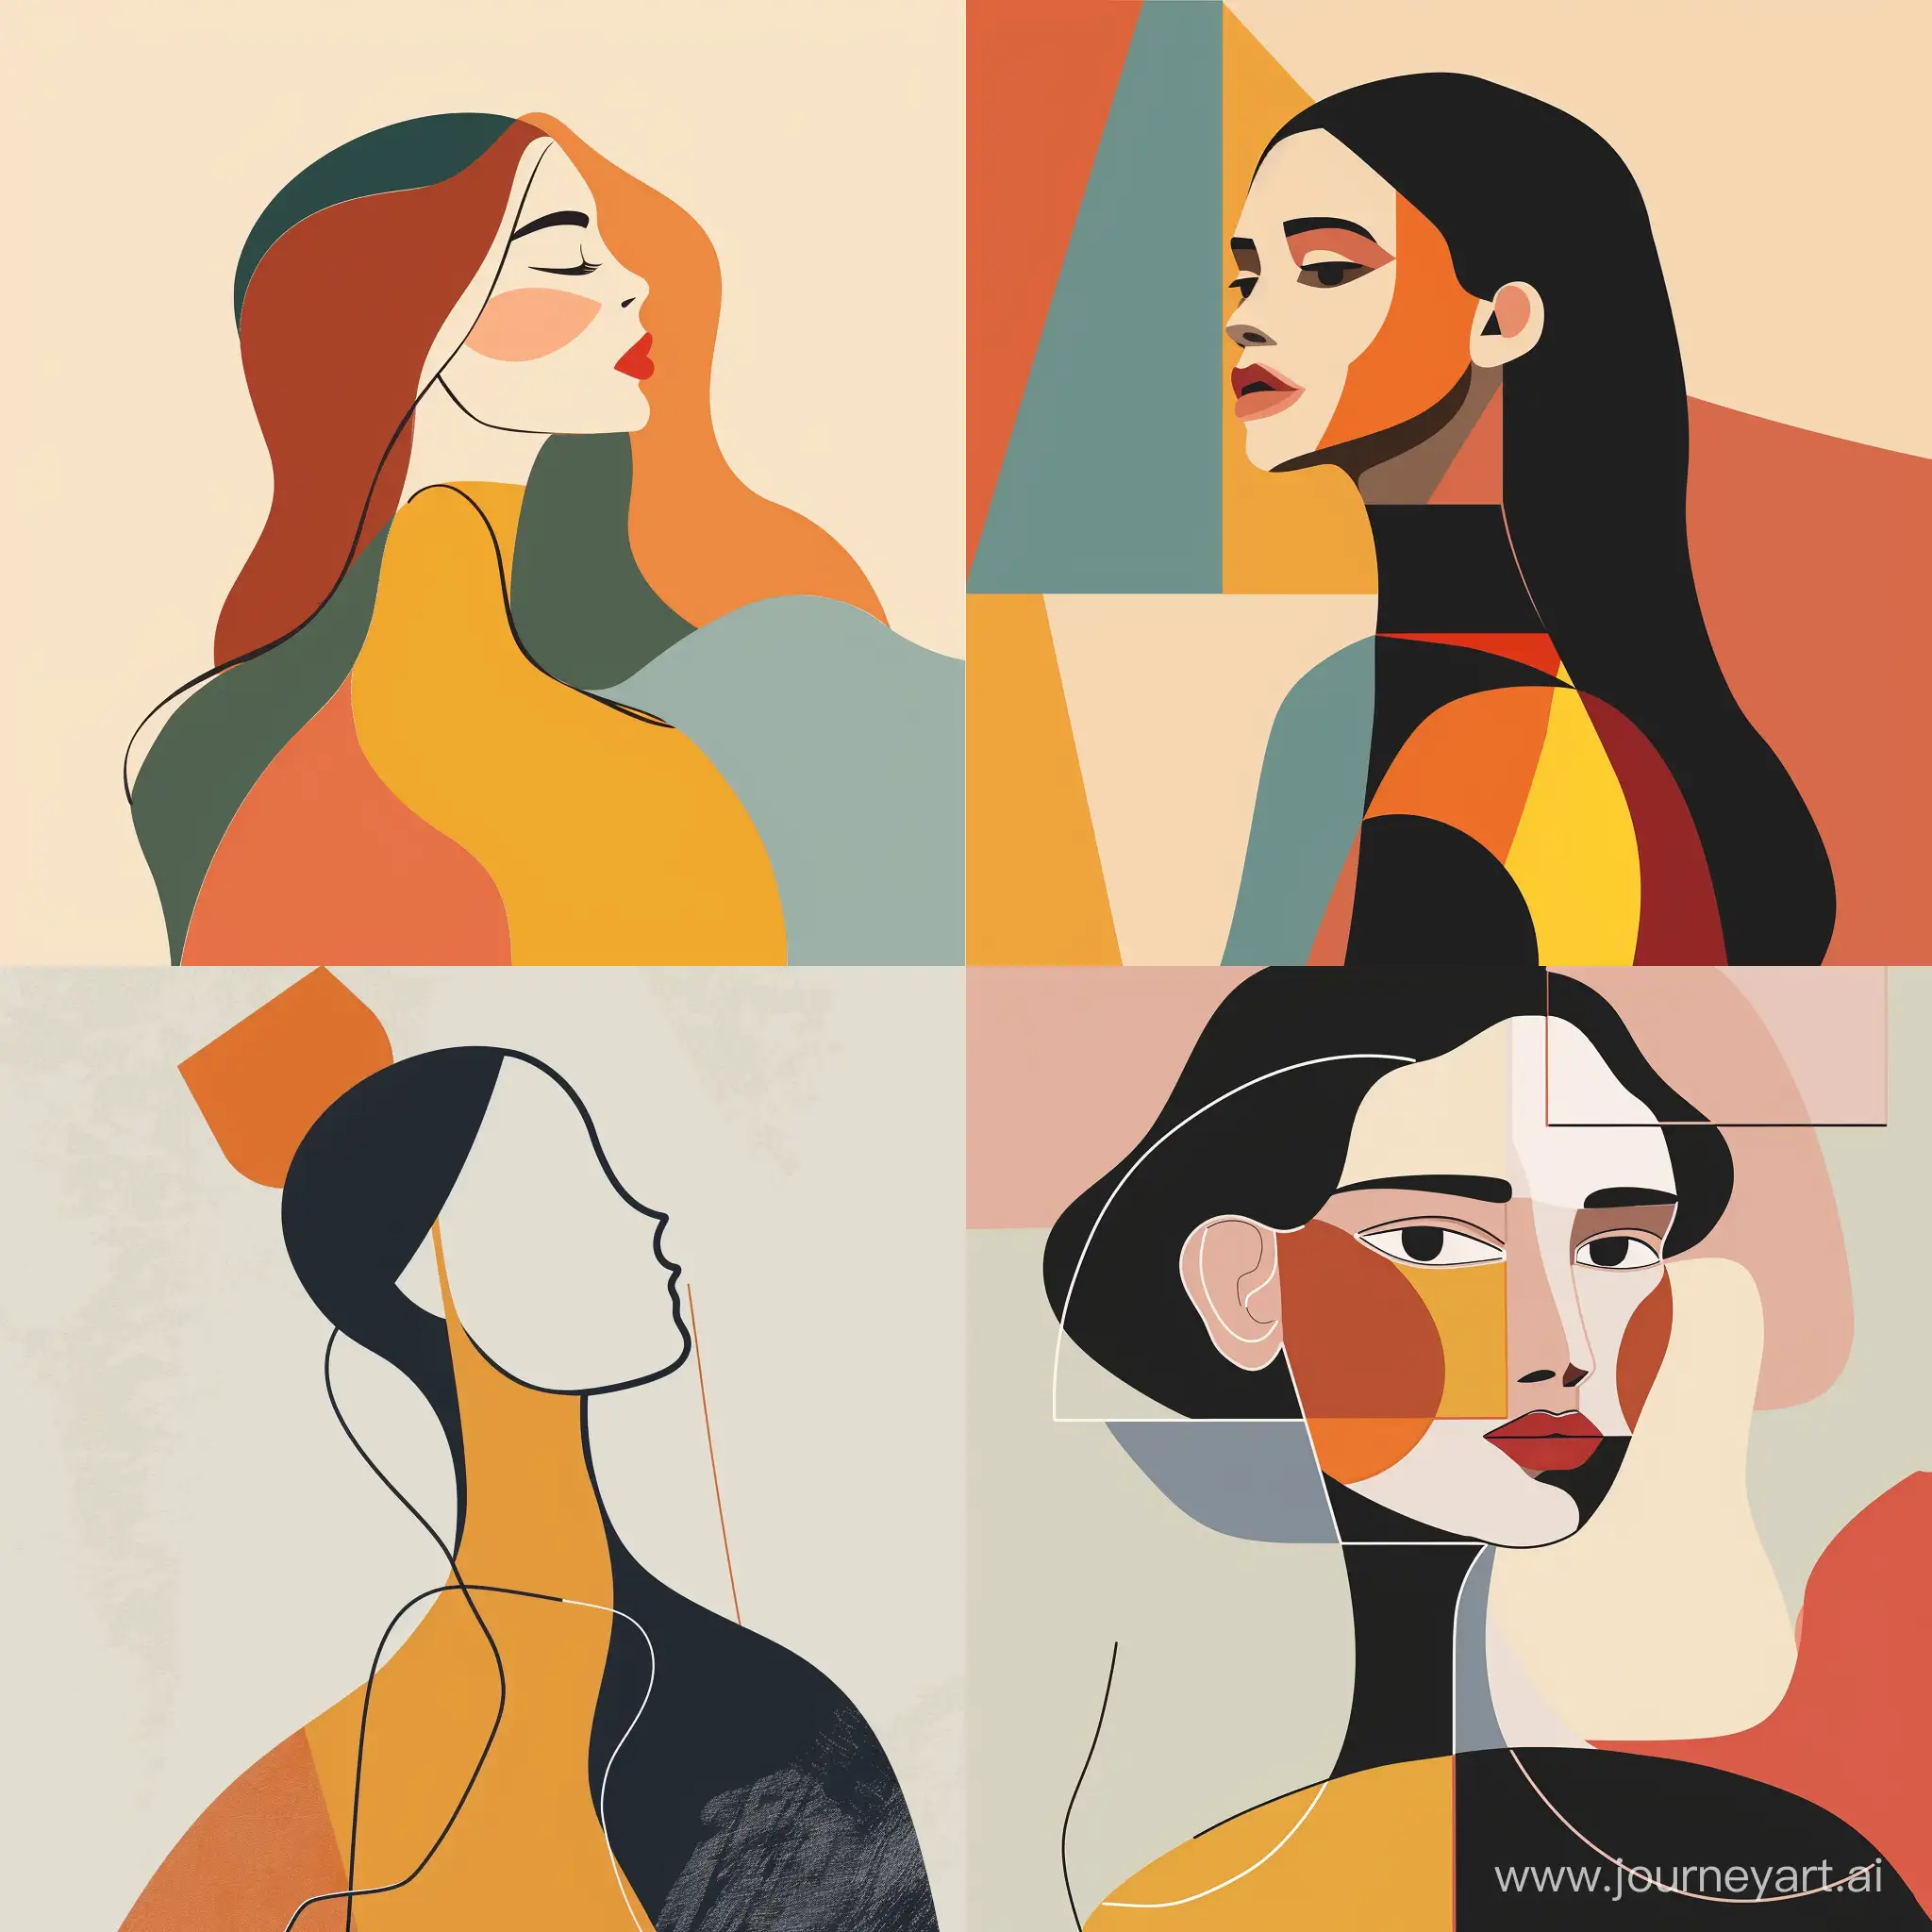 Harmonious-Mosaic-Style-Woman-Abstract-Portrait-with-Minimalistic-Long-Neck-Design